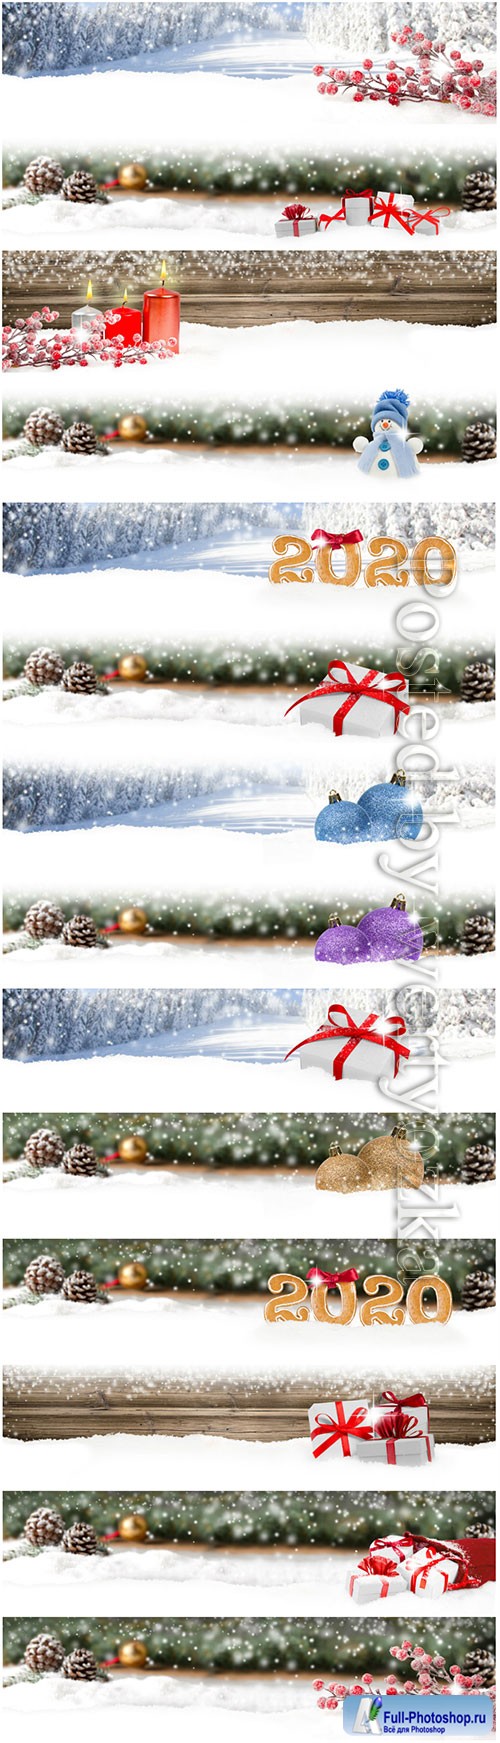 Christmas banners with fir branches, candles and Christmas decorations